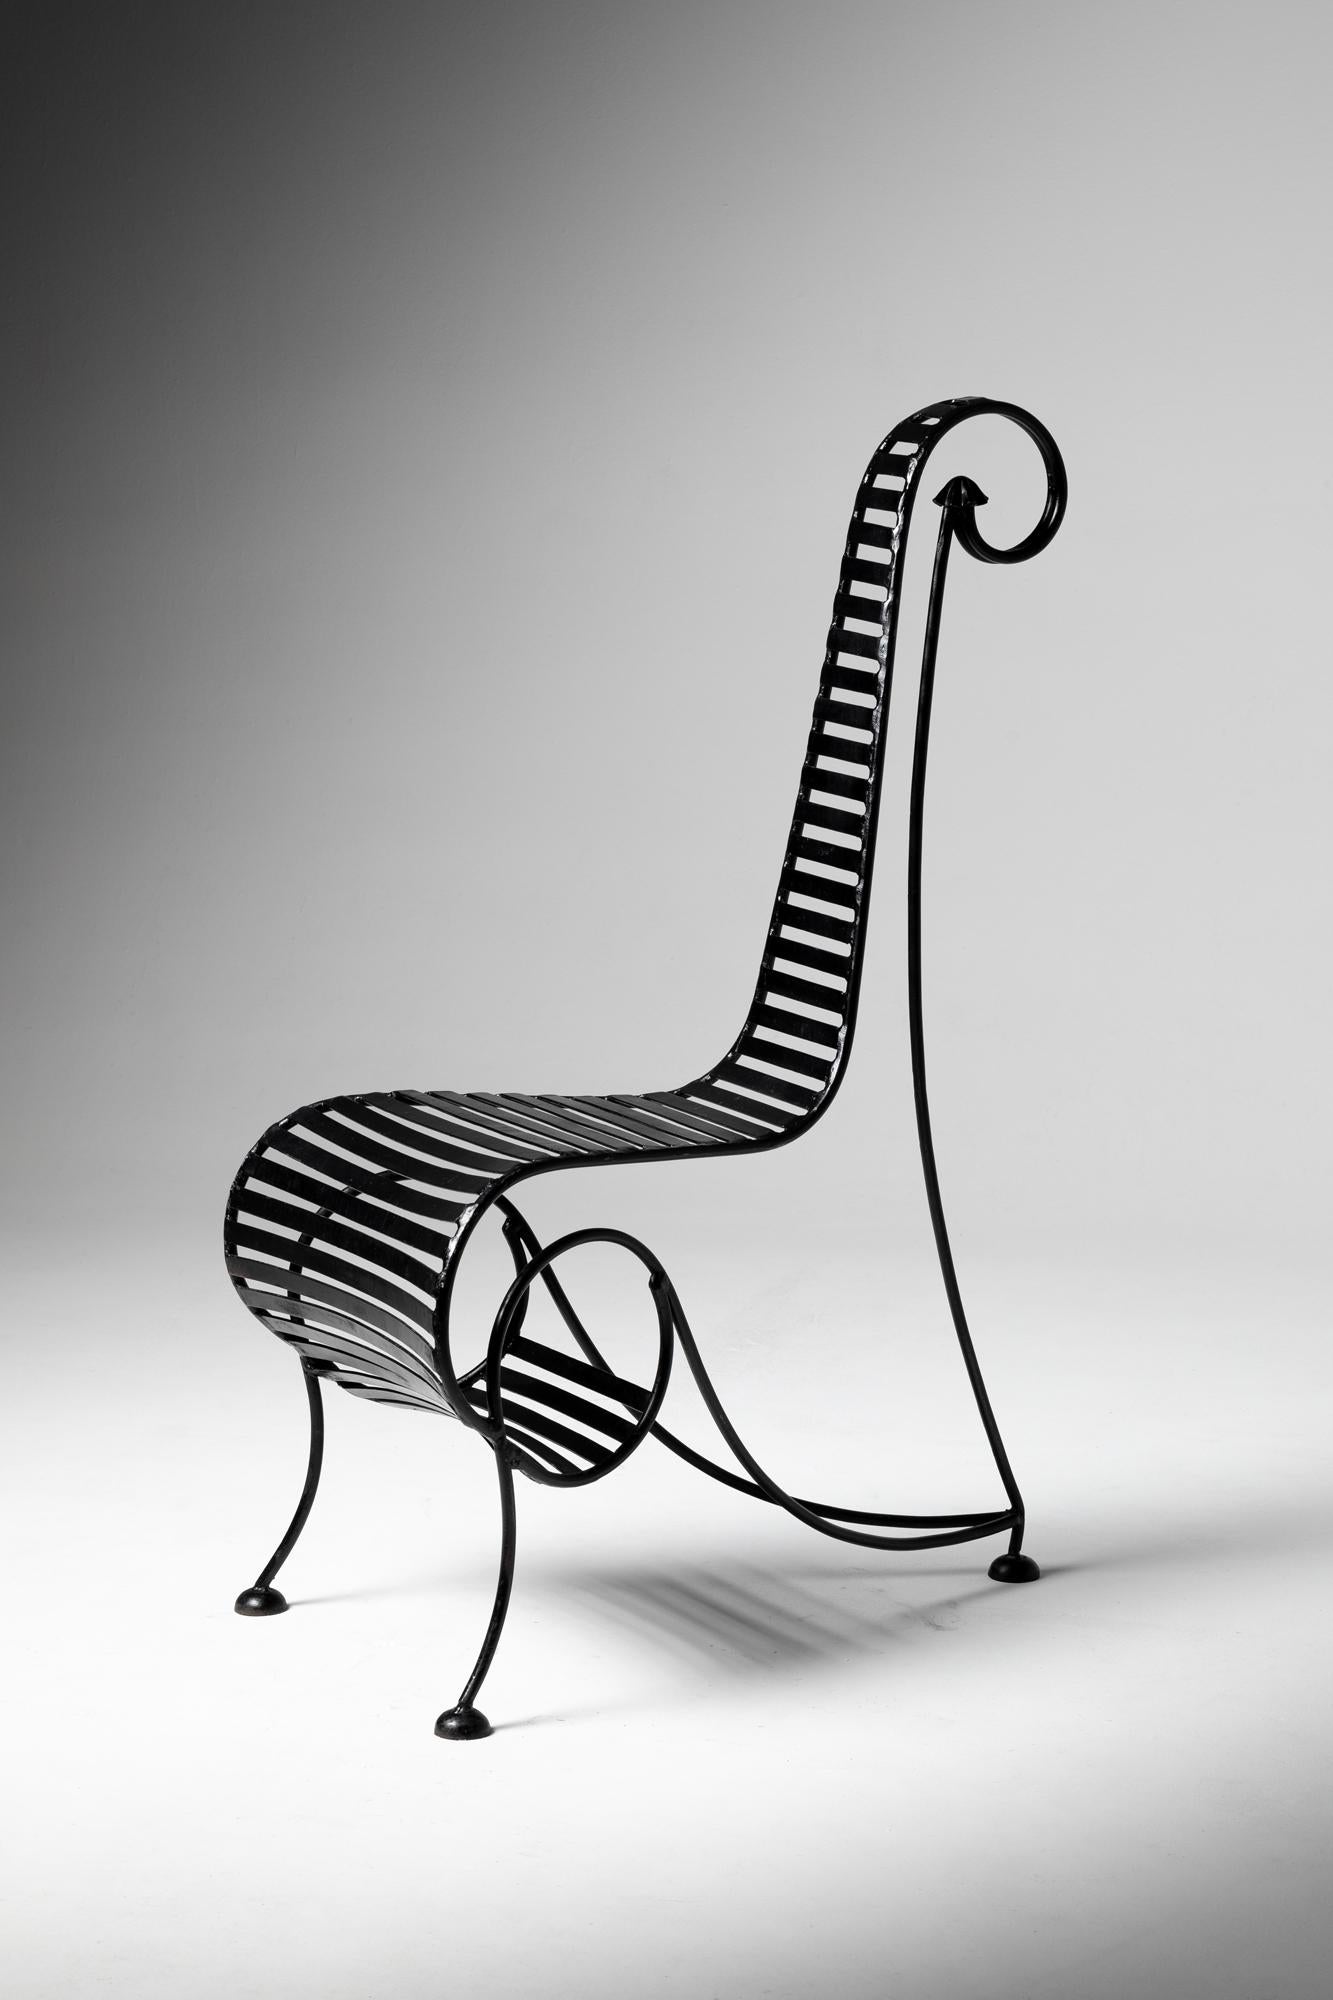 André Dubreuil is a French designer and artist known for his unique and often avant-garde furniture and metalwork designs. His work often blends elements of sculpture, craftsmanship, and industrial design, creating pieces that are both functional